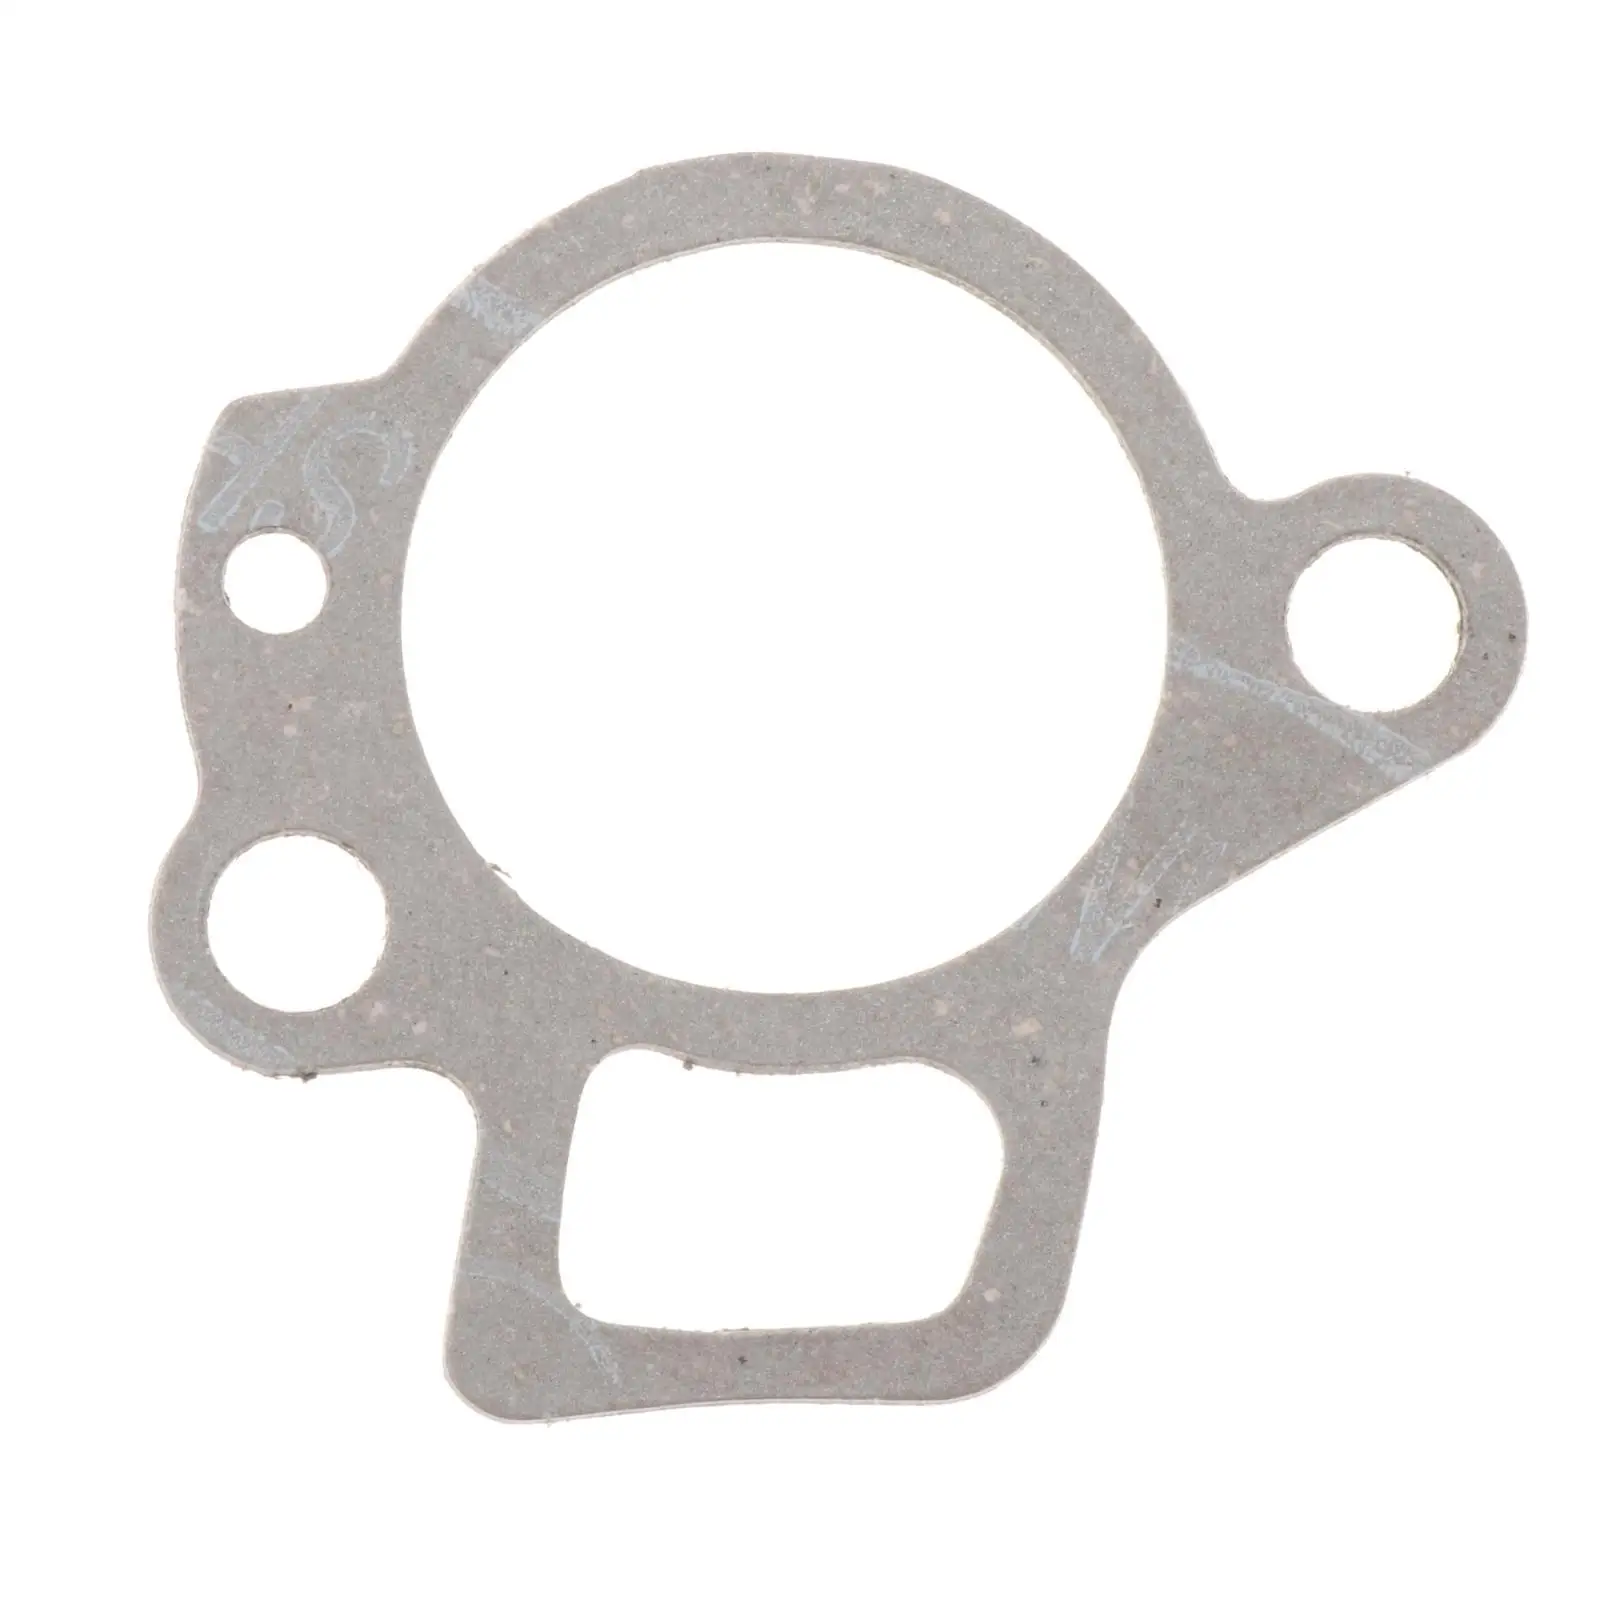 Thermostat Gasket 541-25 for Yamaha Outboard Engine High Performance